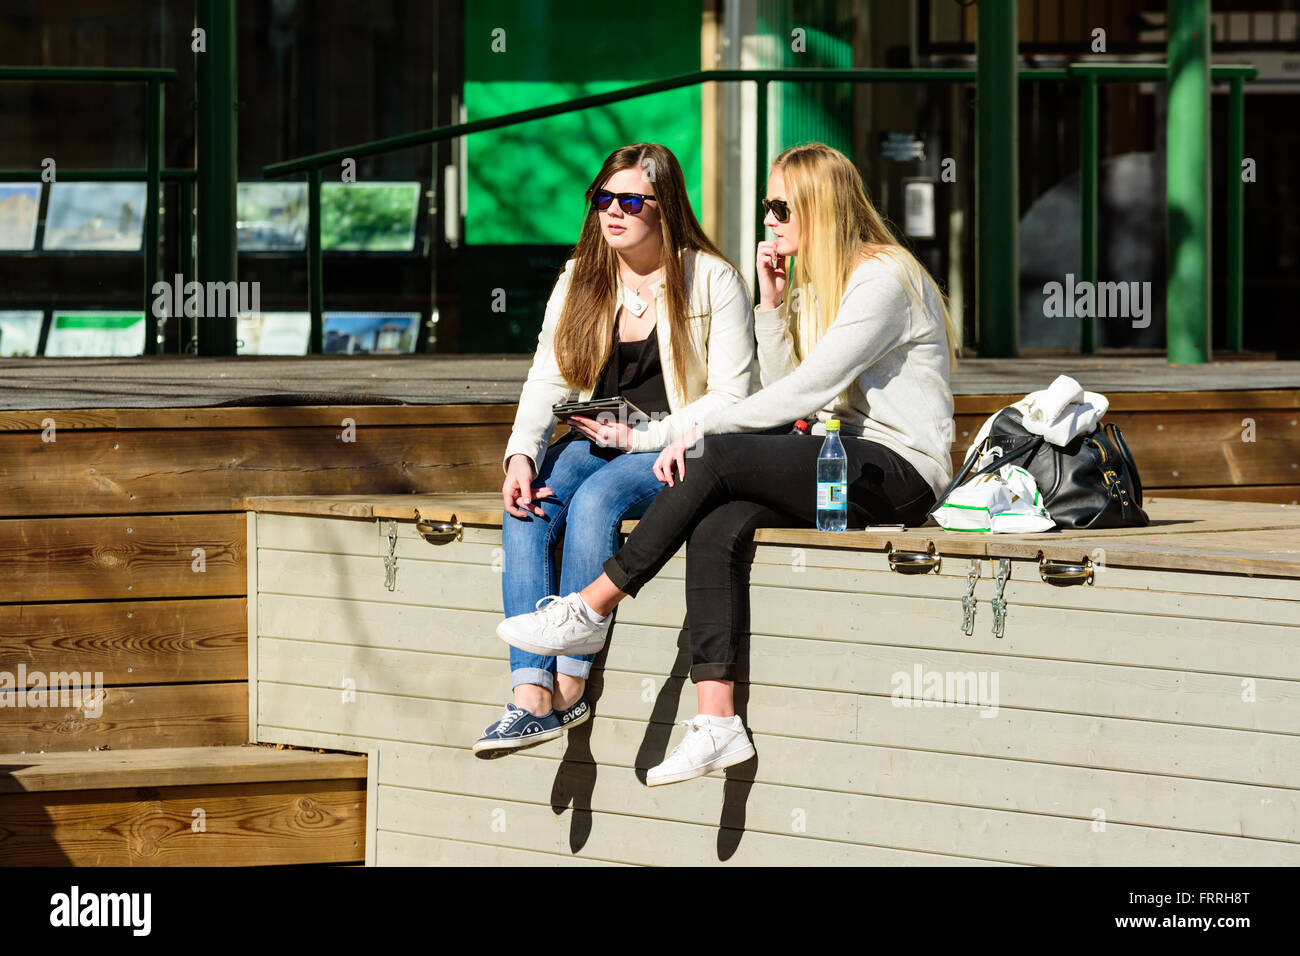 Kalmar, Sweden - March 17, 2016: Two female young adults sit on a wooden scene and are having a talk. Both wear sunglasses and b Stock Photo